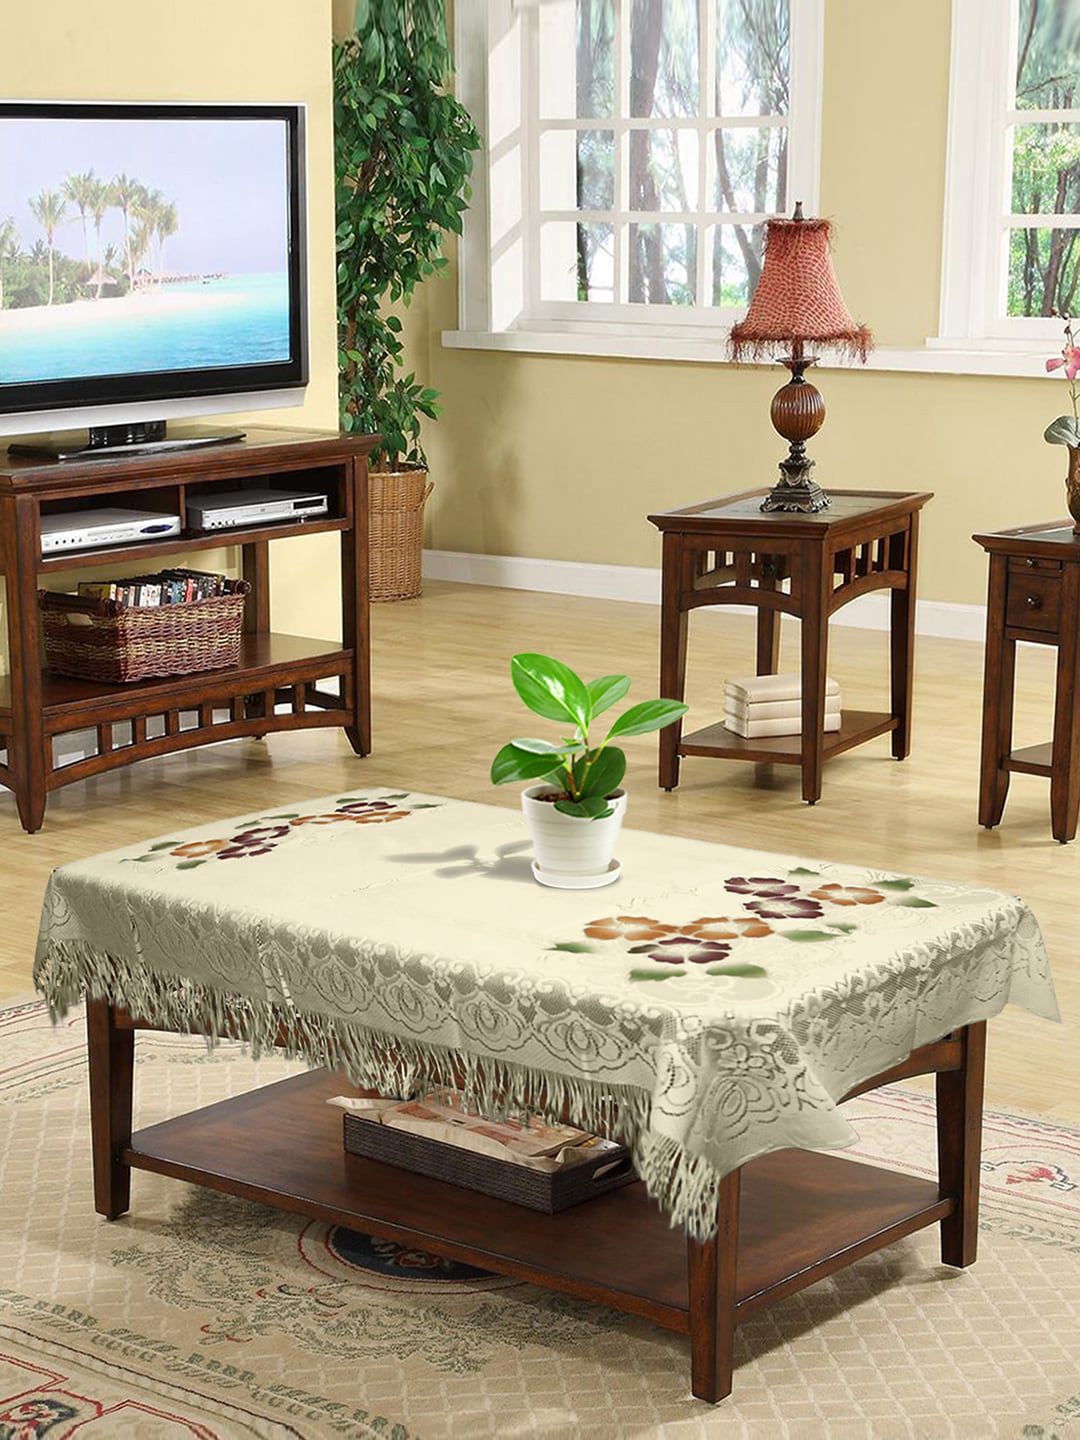 Kuber Industries Cream-Coloured & Pink Floral Printed 4-Seater Rectangle Cotton Table Cover Price in India